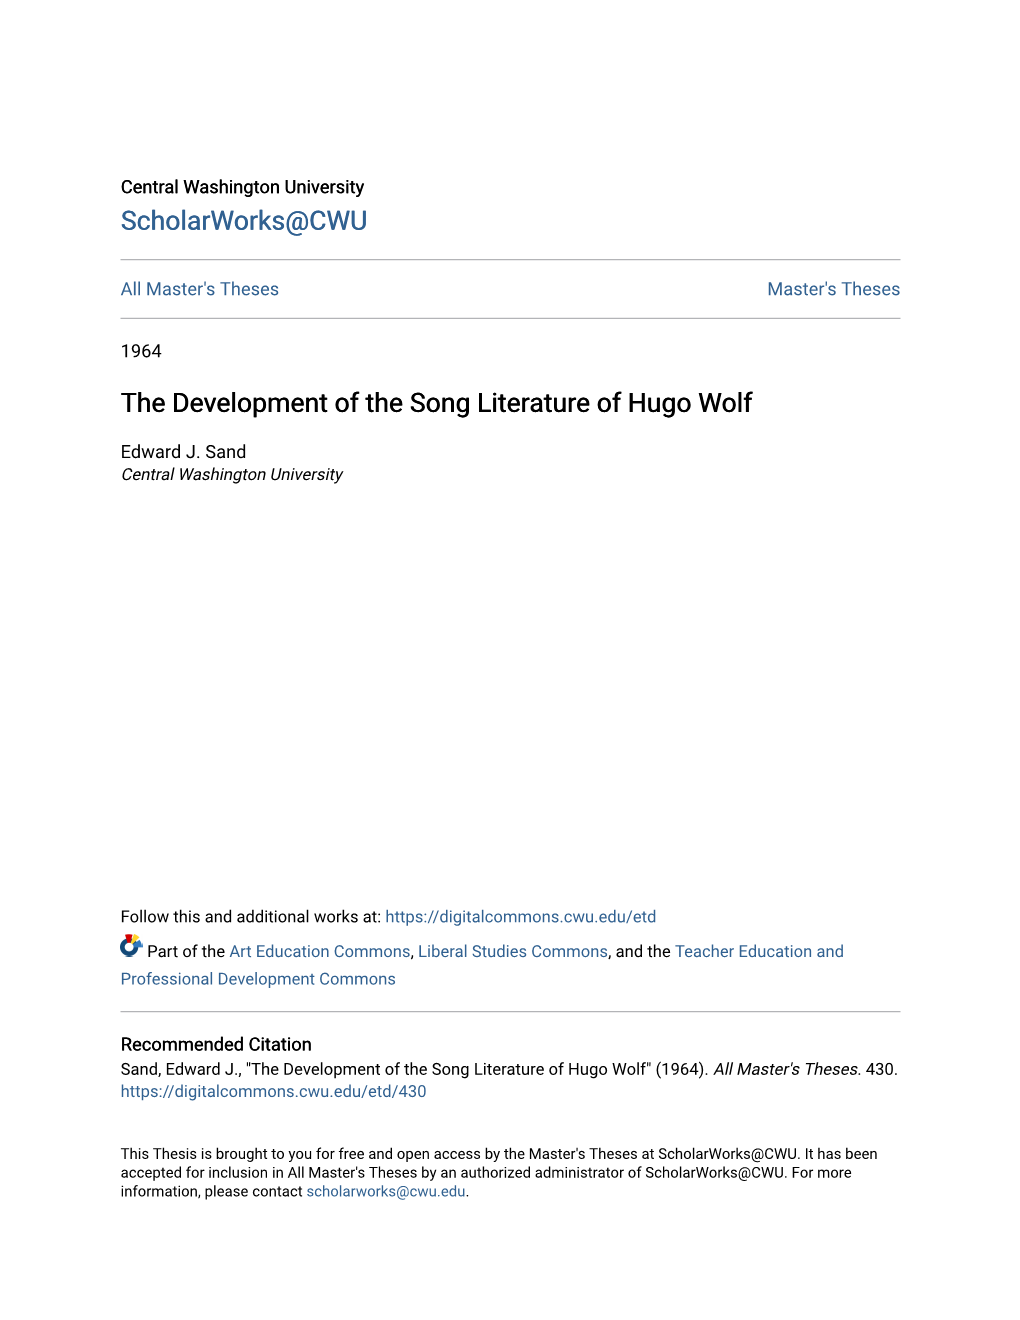 The Development of the Song Literature of Hugo Wolf